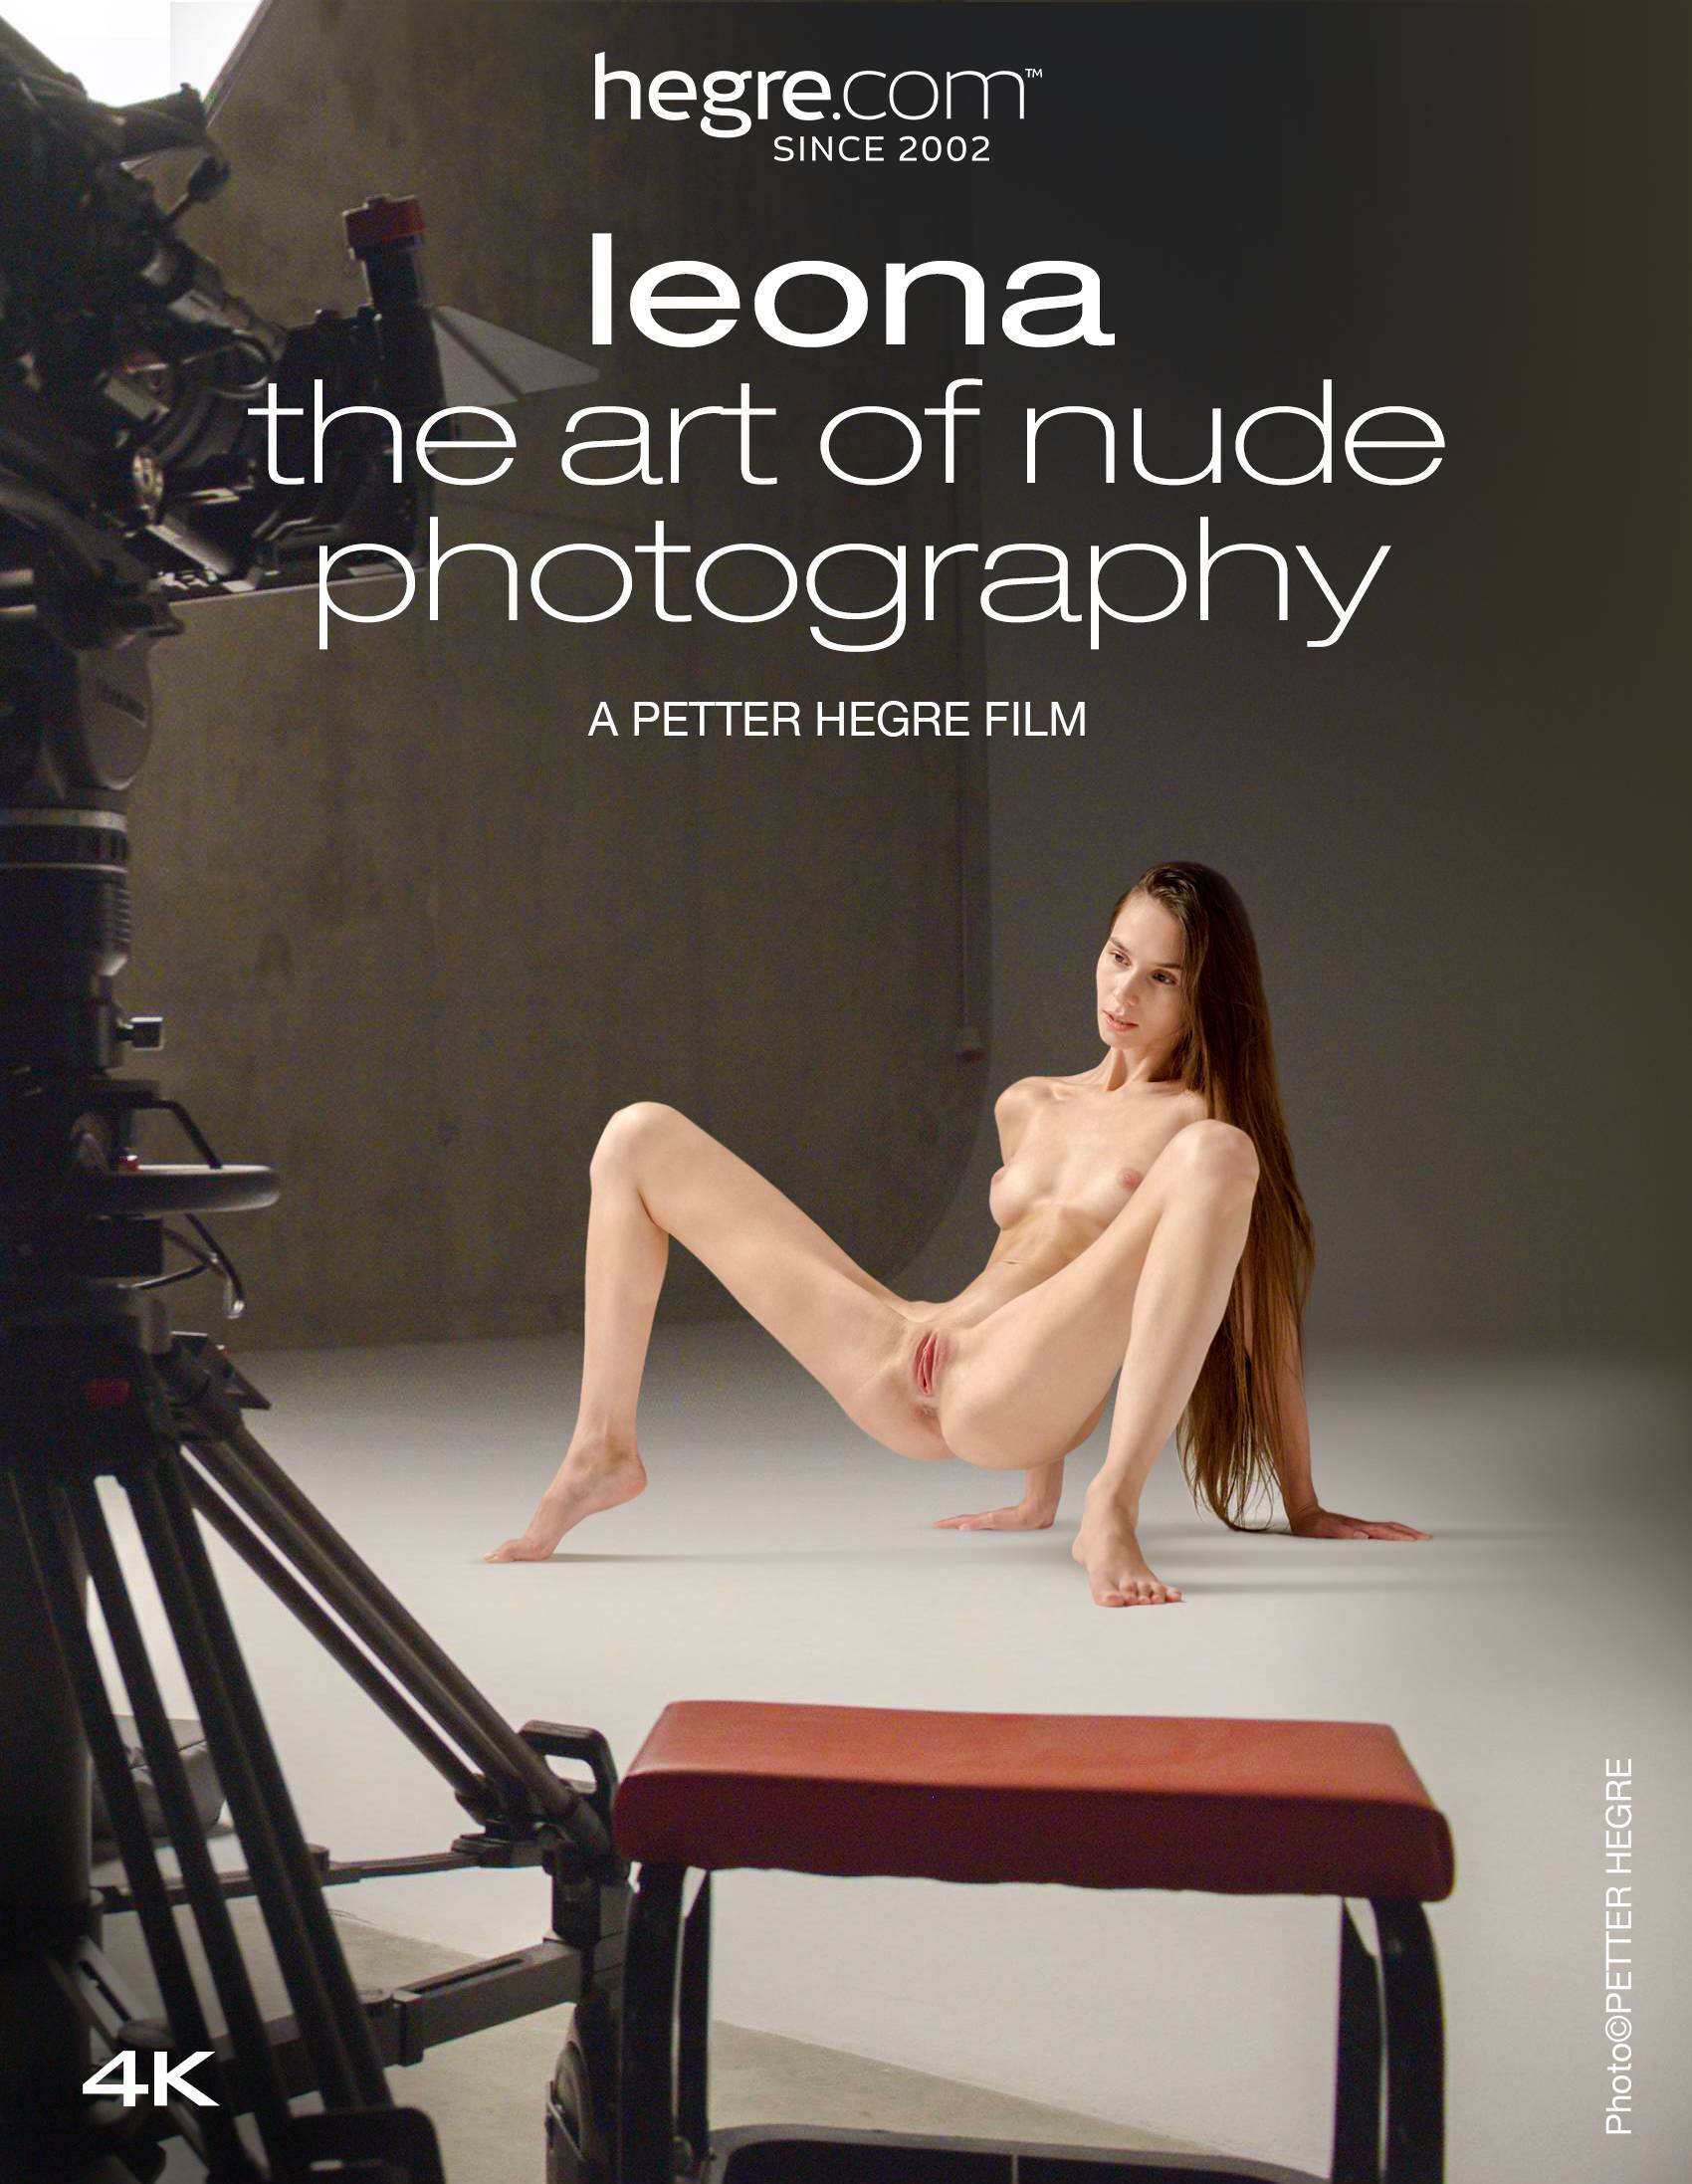 leona-the-art-of-nude-photography-poster.jpg